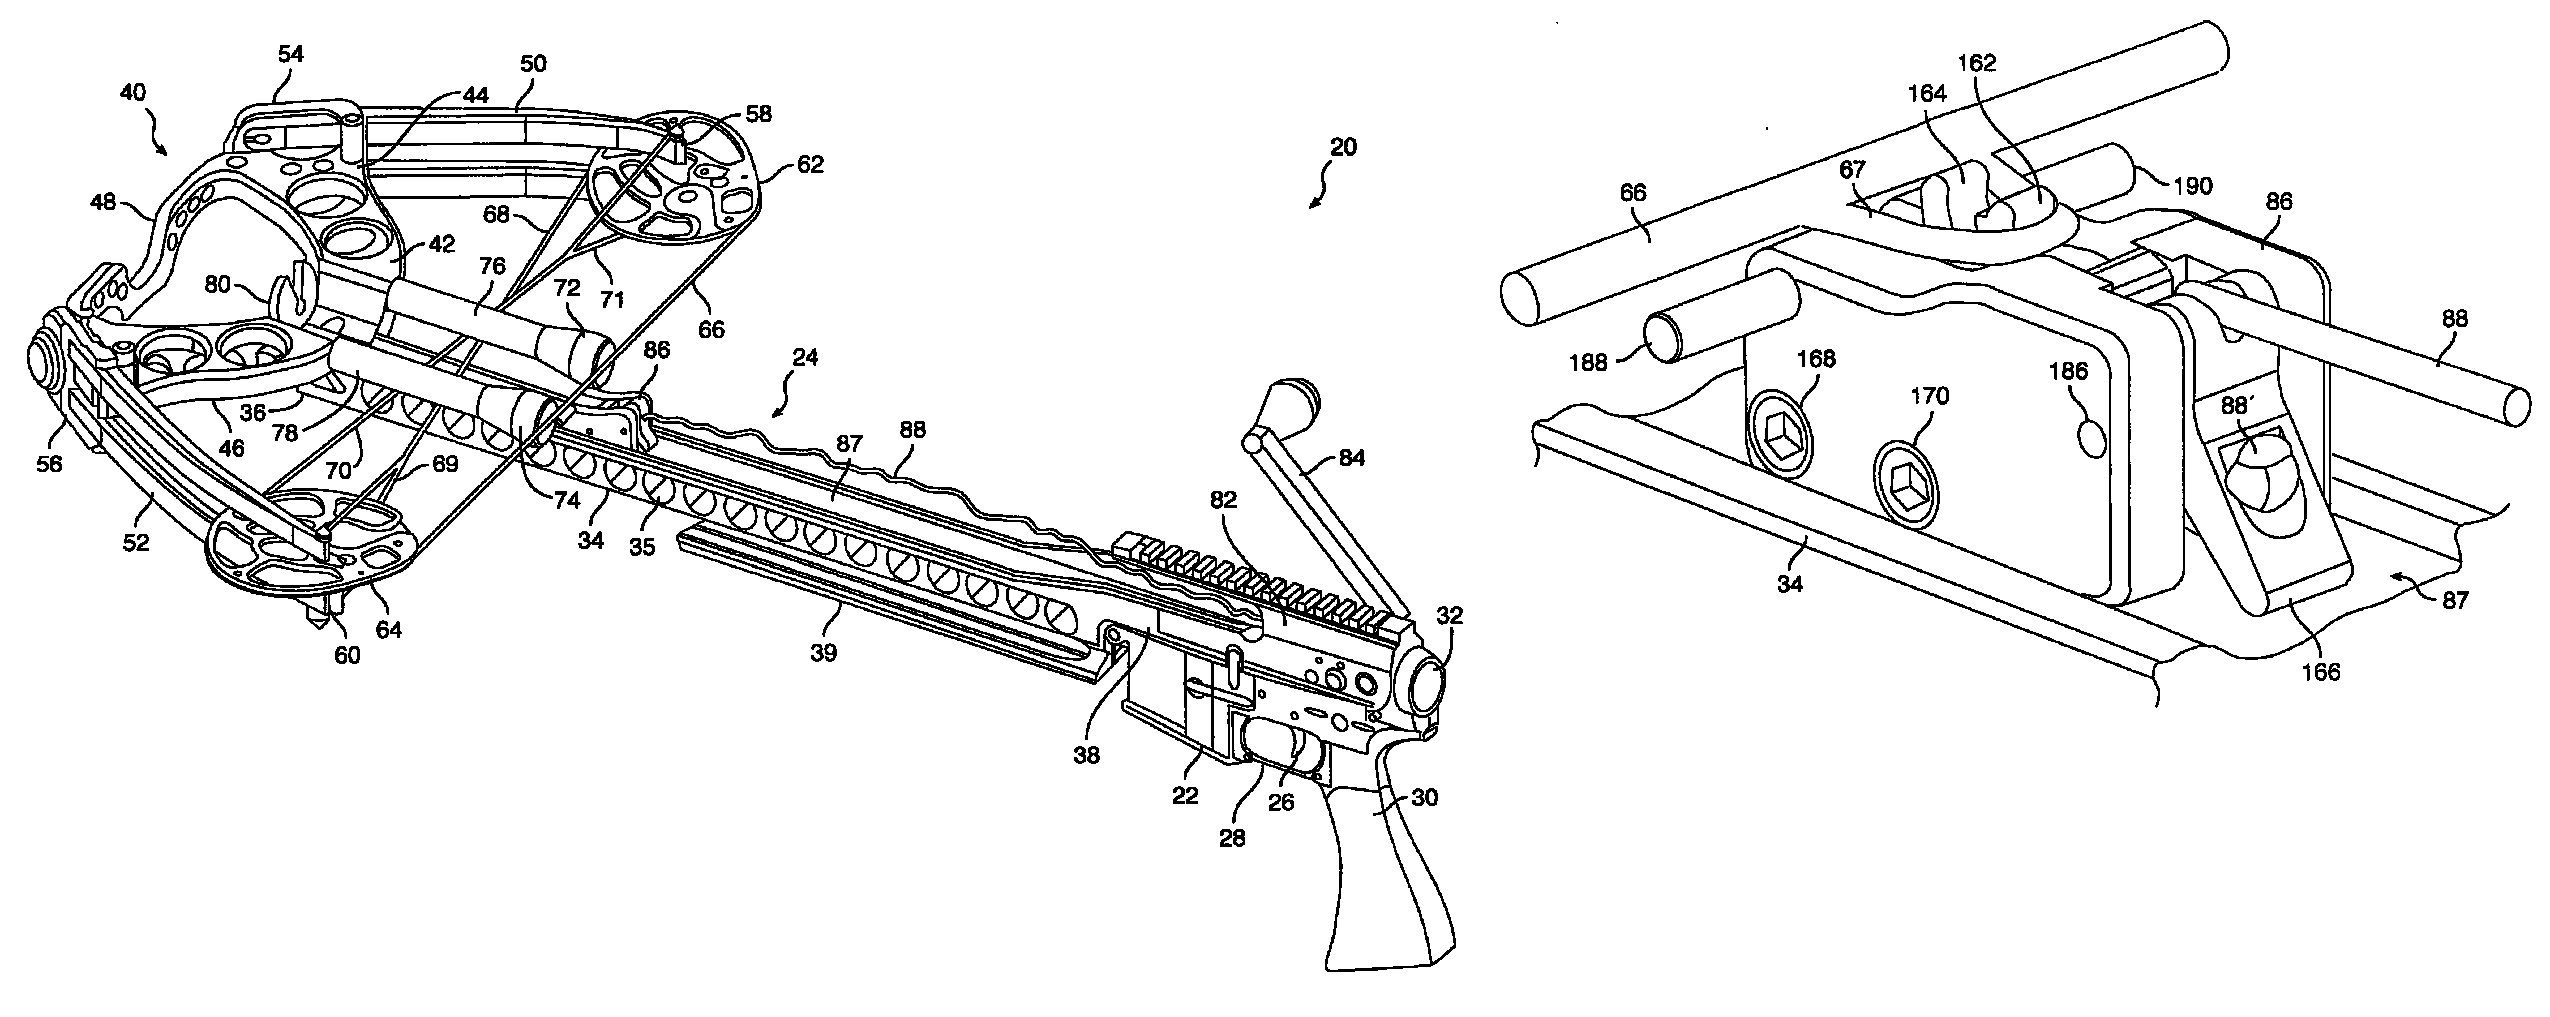 Release assembly for crossbow